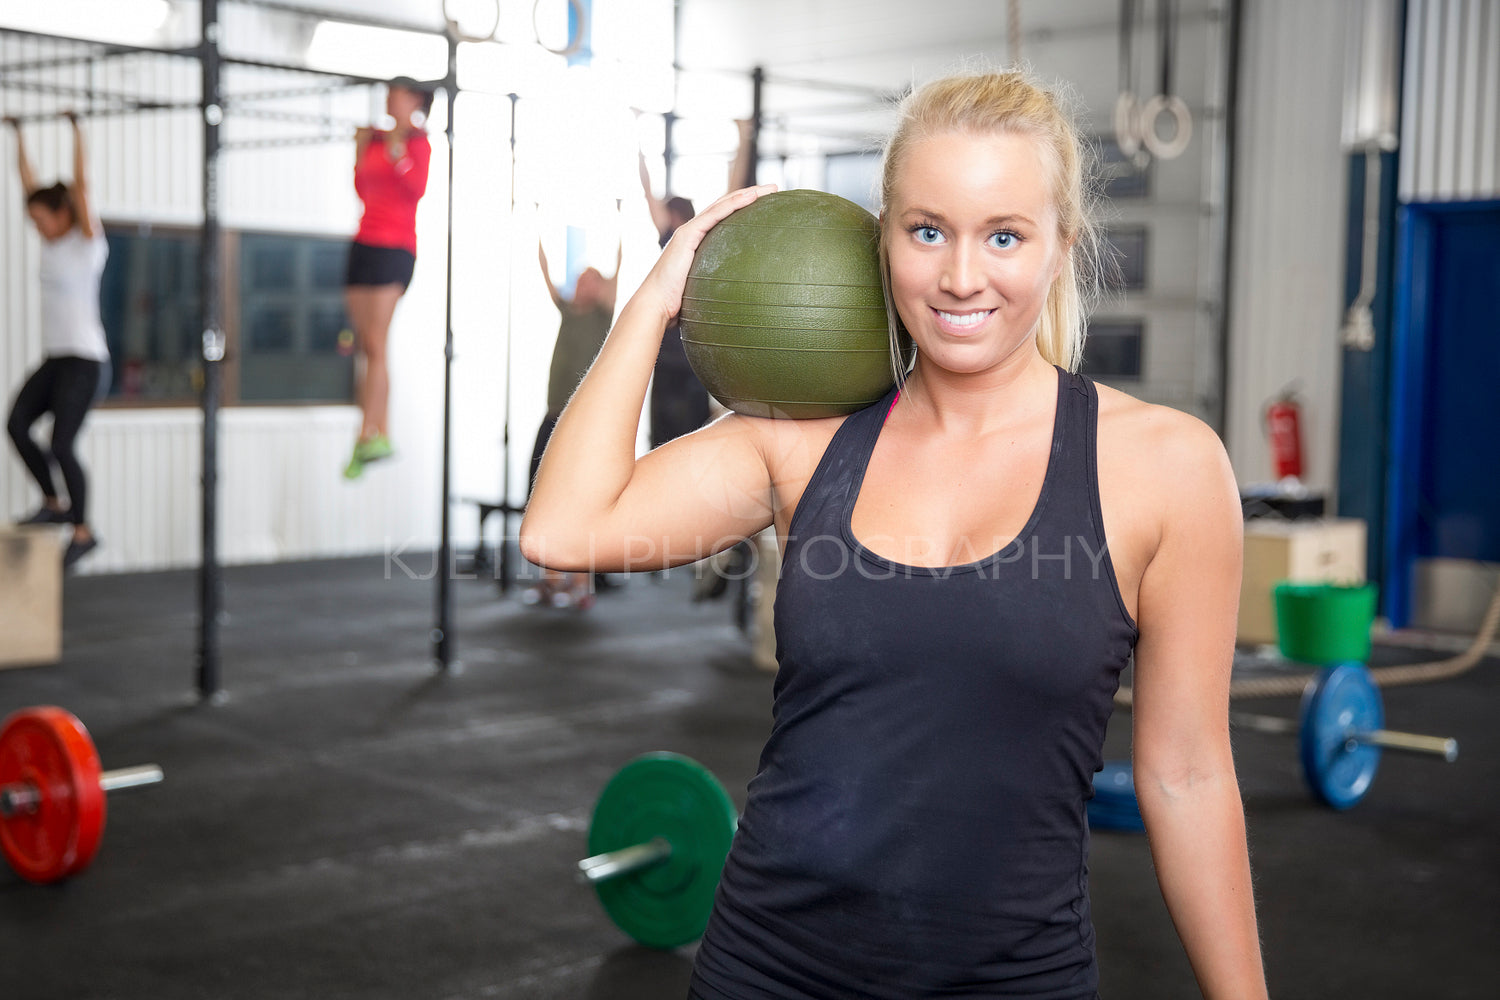 Smiling blonde woman with slam ball at fitness gym